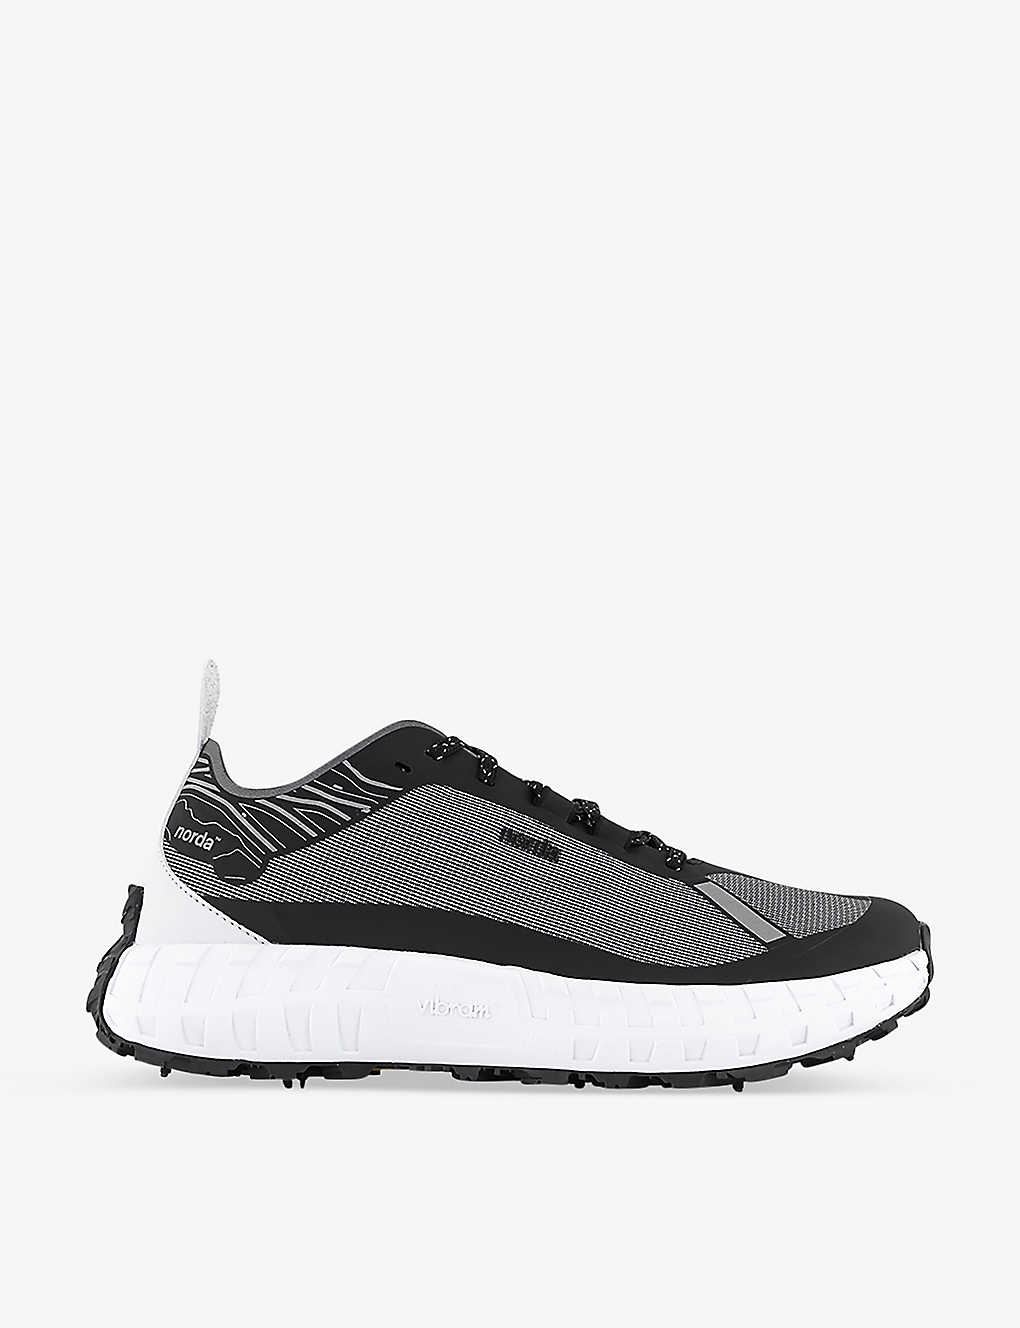 Norda Mens Black White 001 Woven Low-top Trainers